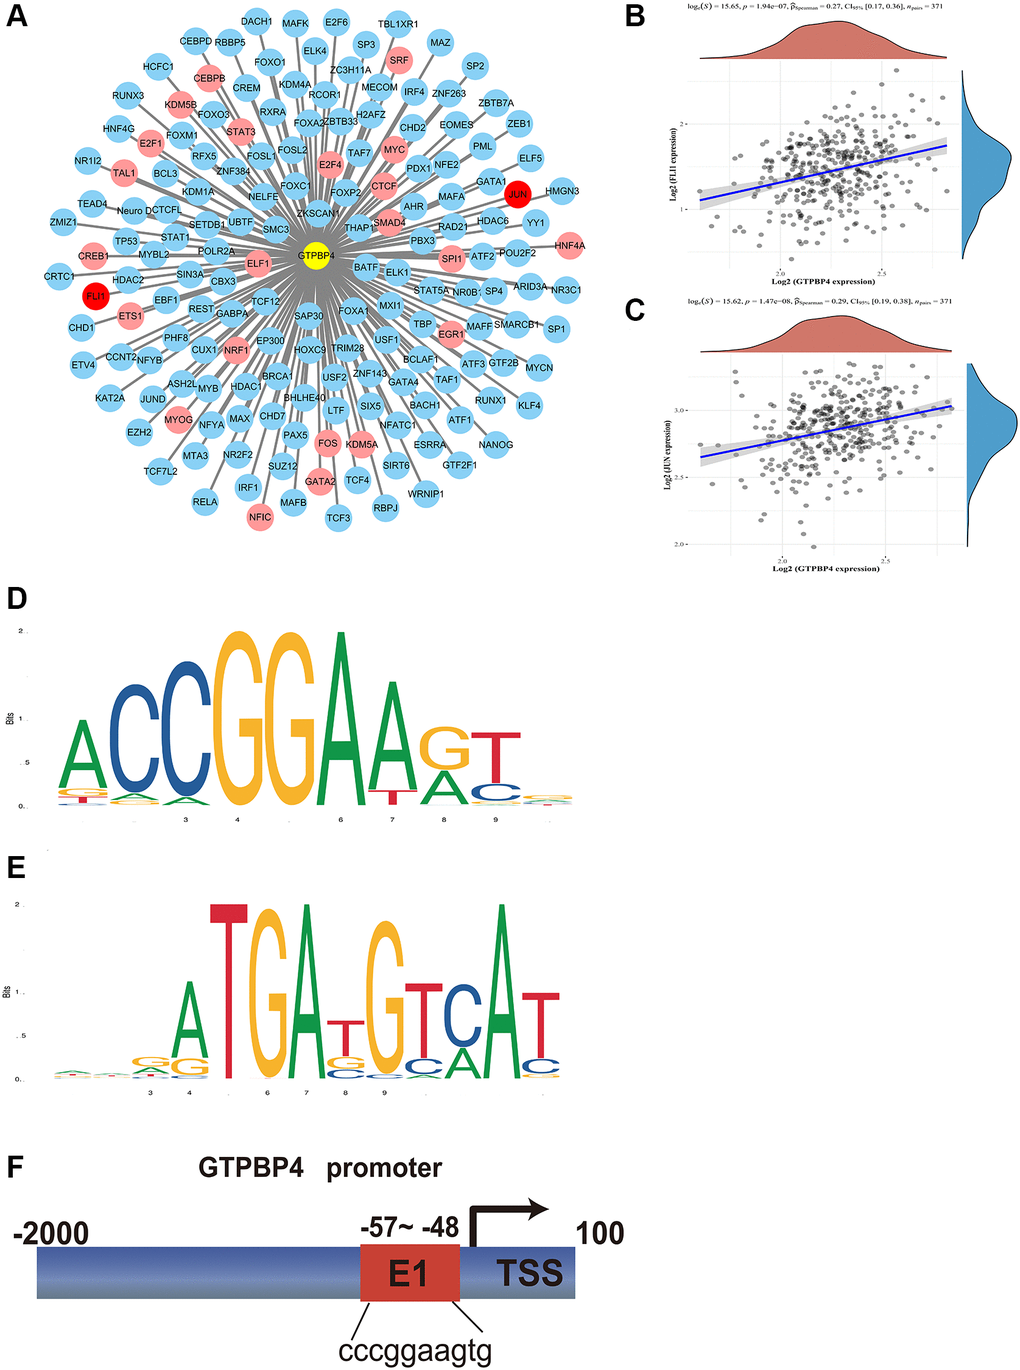 Transcription factors analysis of GTPBP4. (A) Potential transcription factors of GTPBP4 were predicted by multiple sites including CHEA, Encode, Jaspar, MotifMap, Transfac, and Trurust, and potential transcription factors whose total predicted positive results of the sites were recorded: Three sites measured transcription factors in red, two sites in pink, and one site in blue. (B) Correlation analysis of GTPBP4 and FLI-1. (C) Correlation analysis of GTPBP4 and JUN. (D) Sequence motif construction of transcription factor FLI-1. (E) Sequence motif construction of transcription factor JUN. (F) Promoter site prediction of GTPBP4.